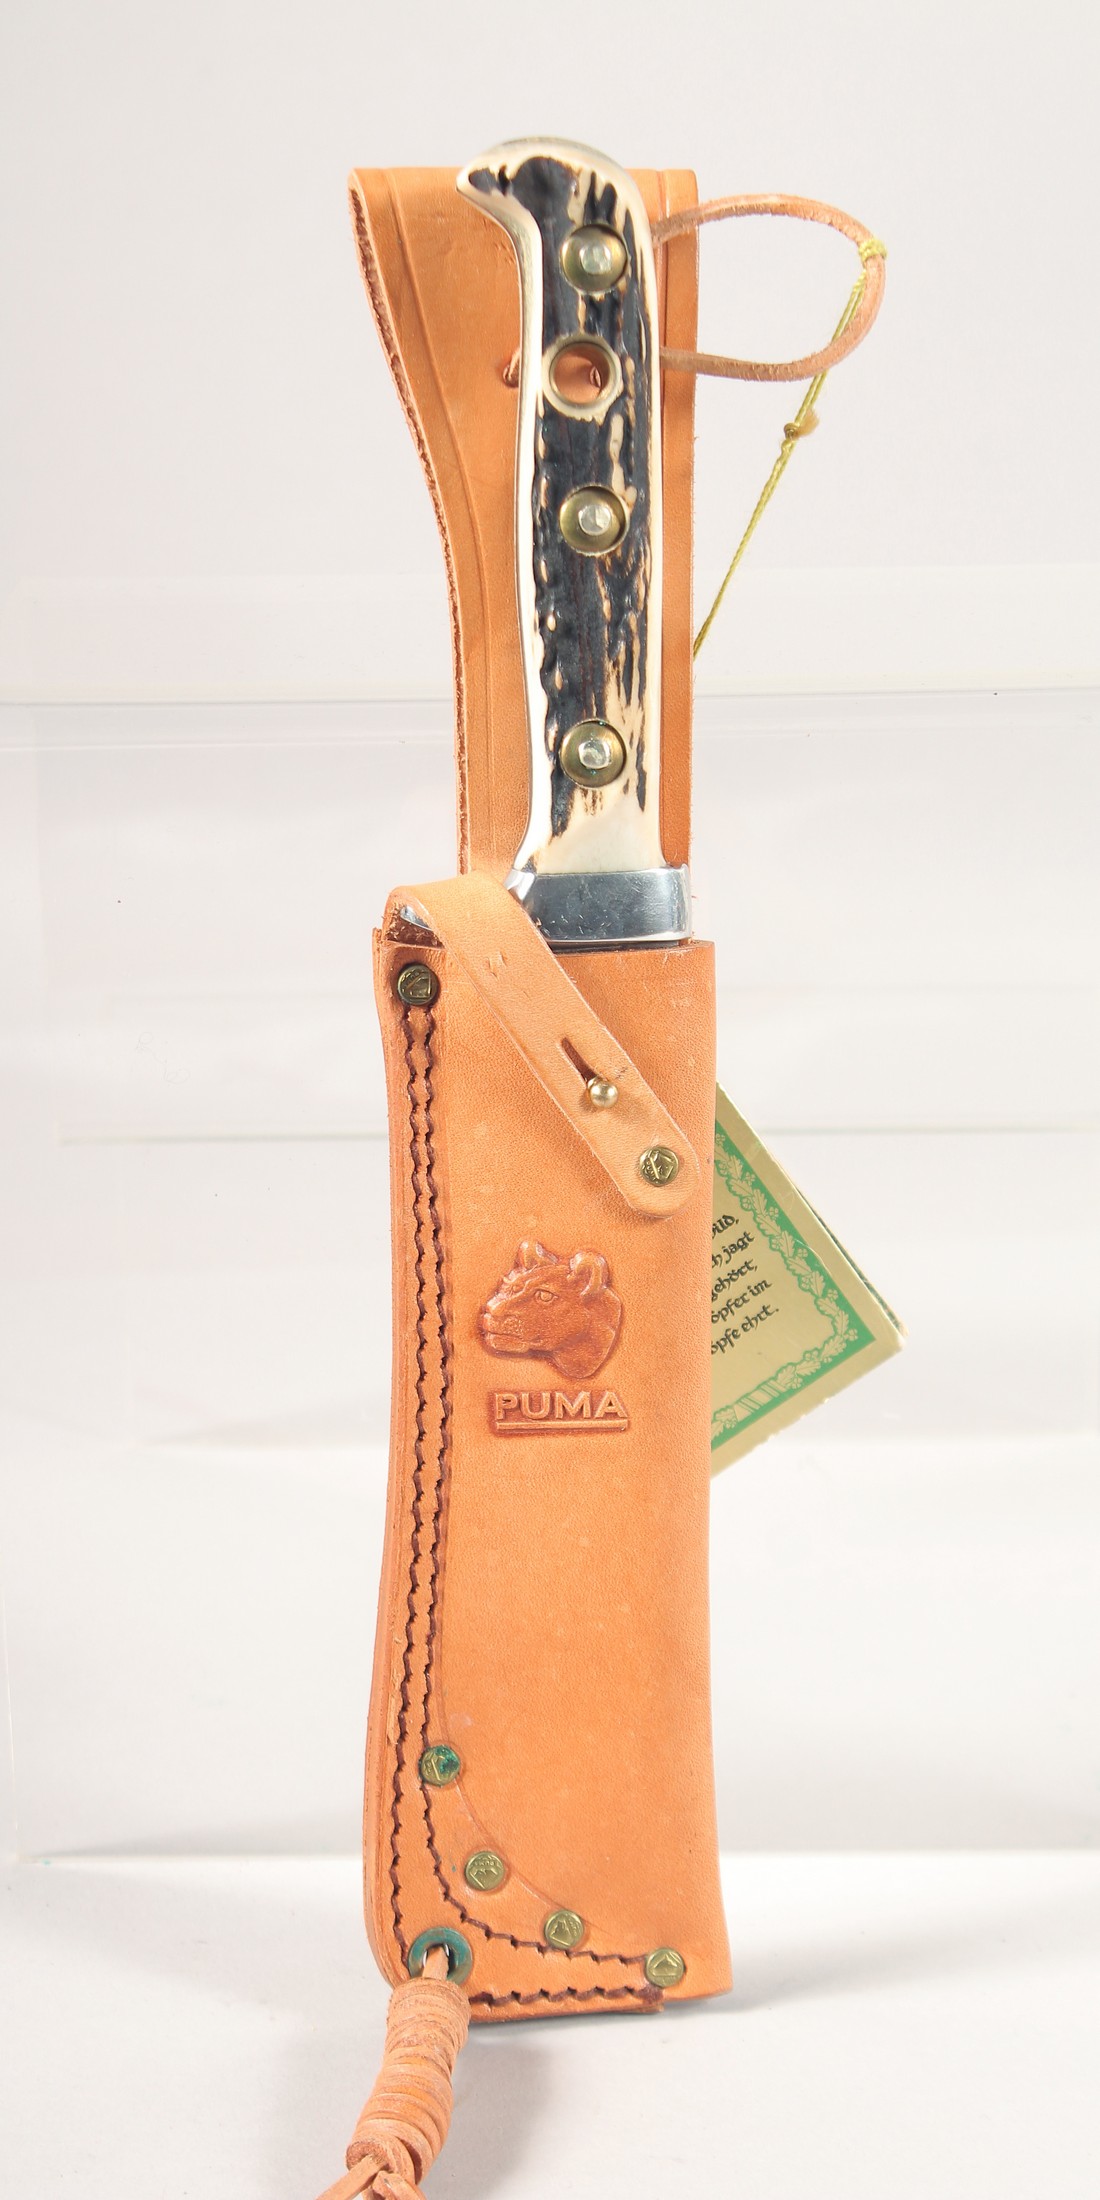 A PUMA WHITE HUNTER KNIFE 6377, with antler handle in a leather sheath, 10" long. - Image 7 of 7